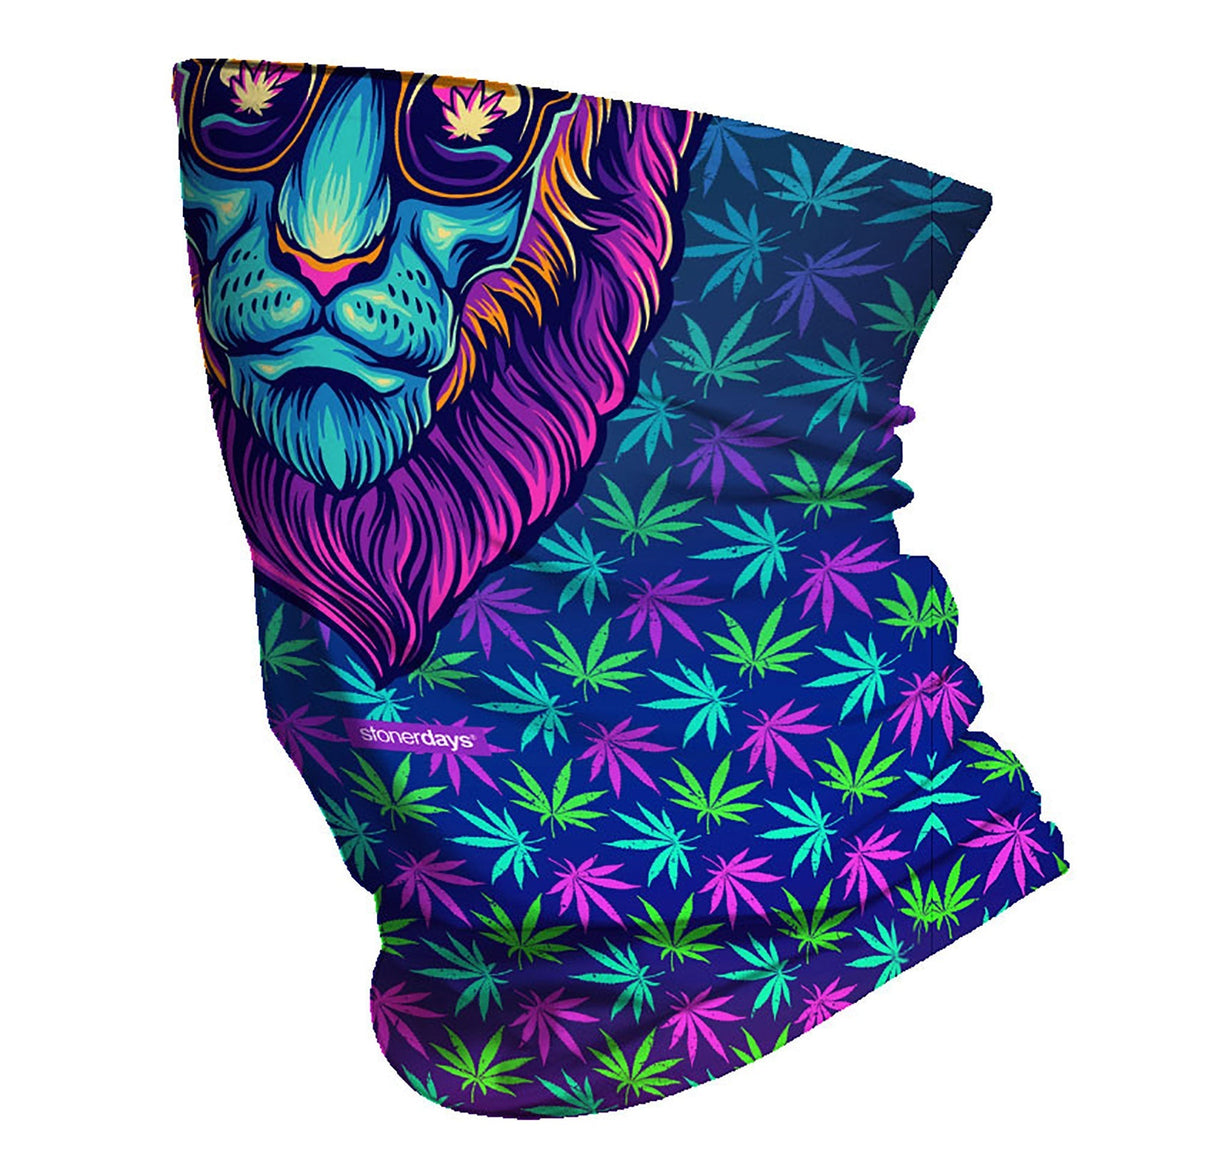 StonerDays Philly Blunts Neck Gaiter with vibrant cannabis leaf design and lion graphic